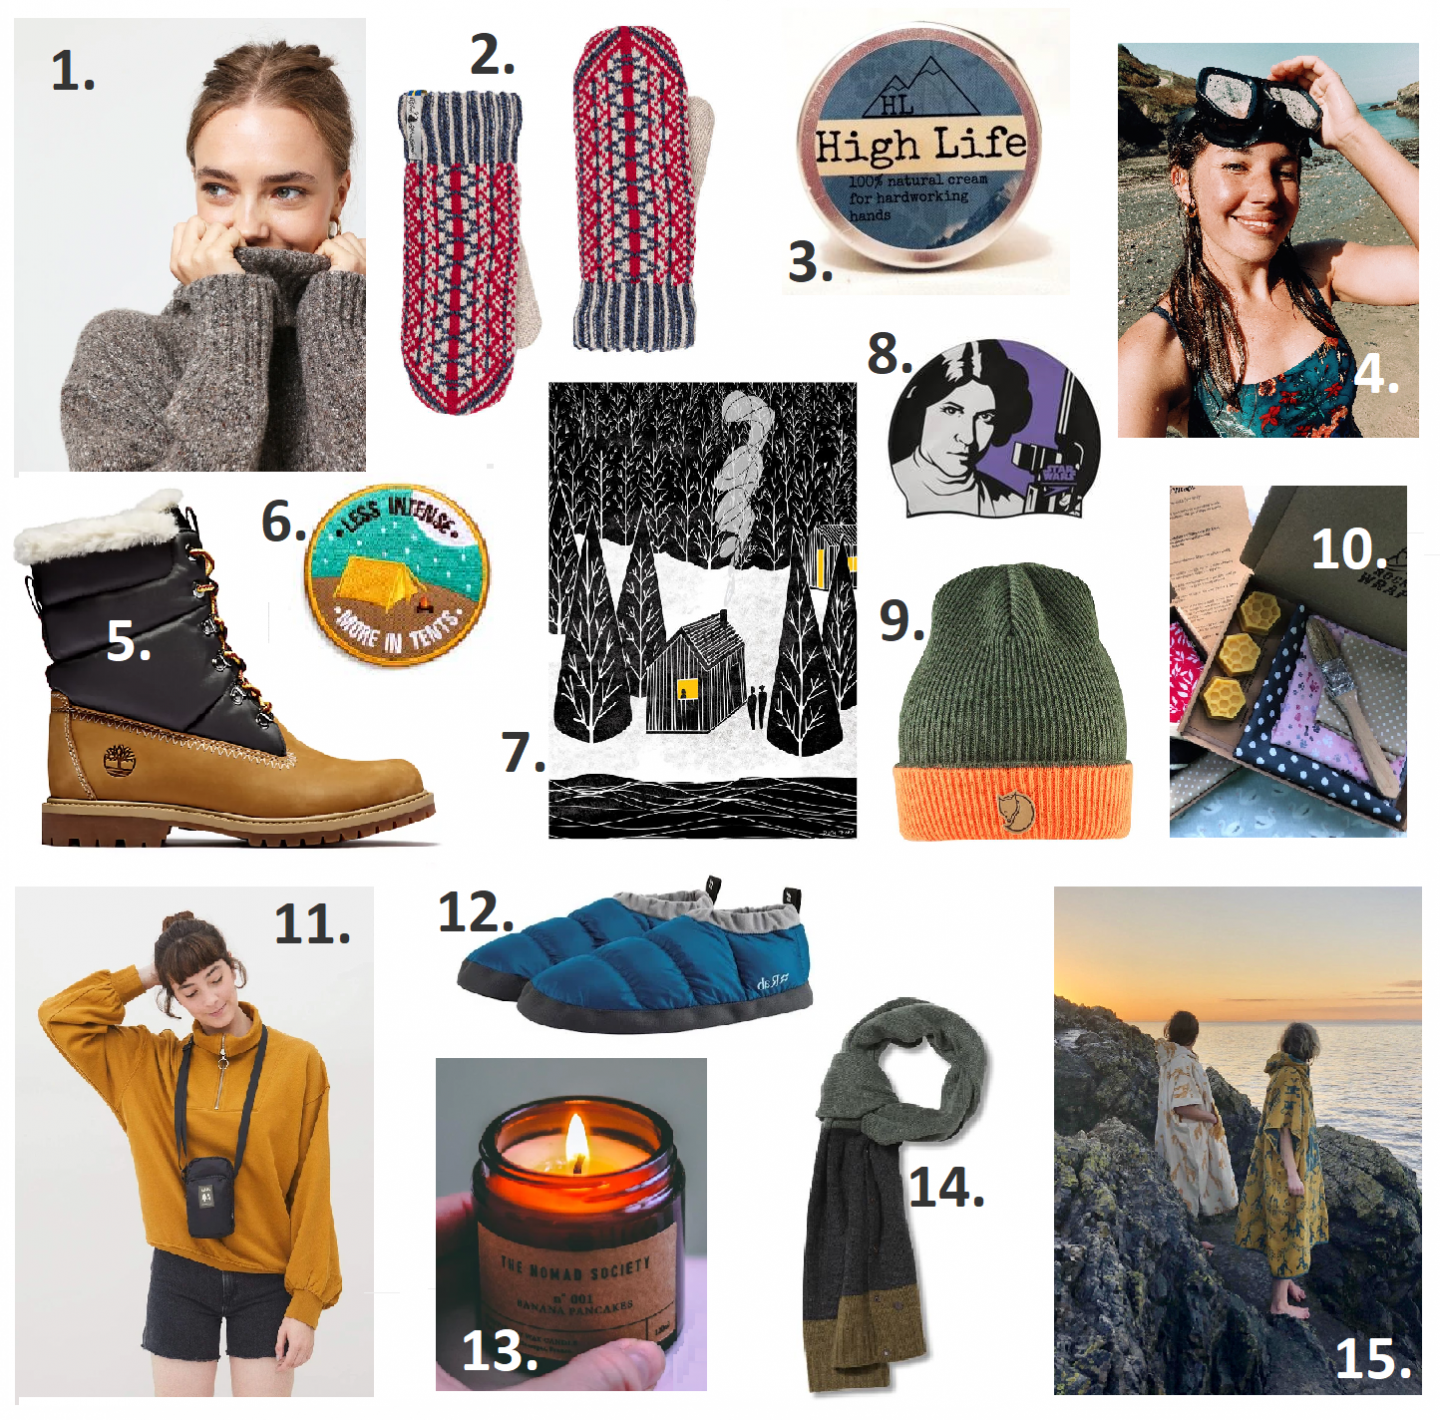 Travel And Outdoors Christmas Gift Guide 2020 | Best Outdoor Presents